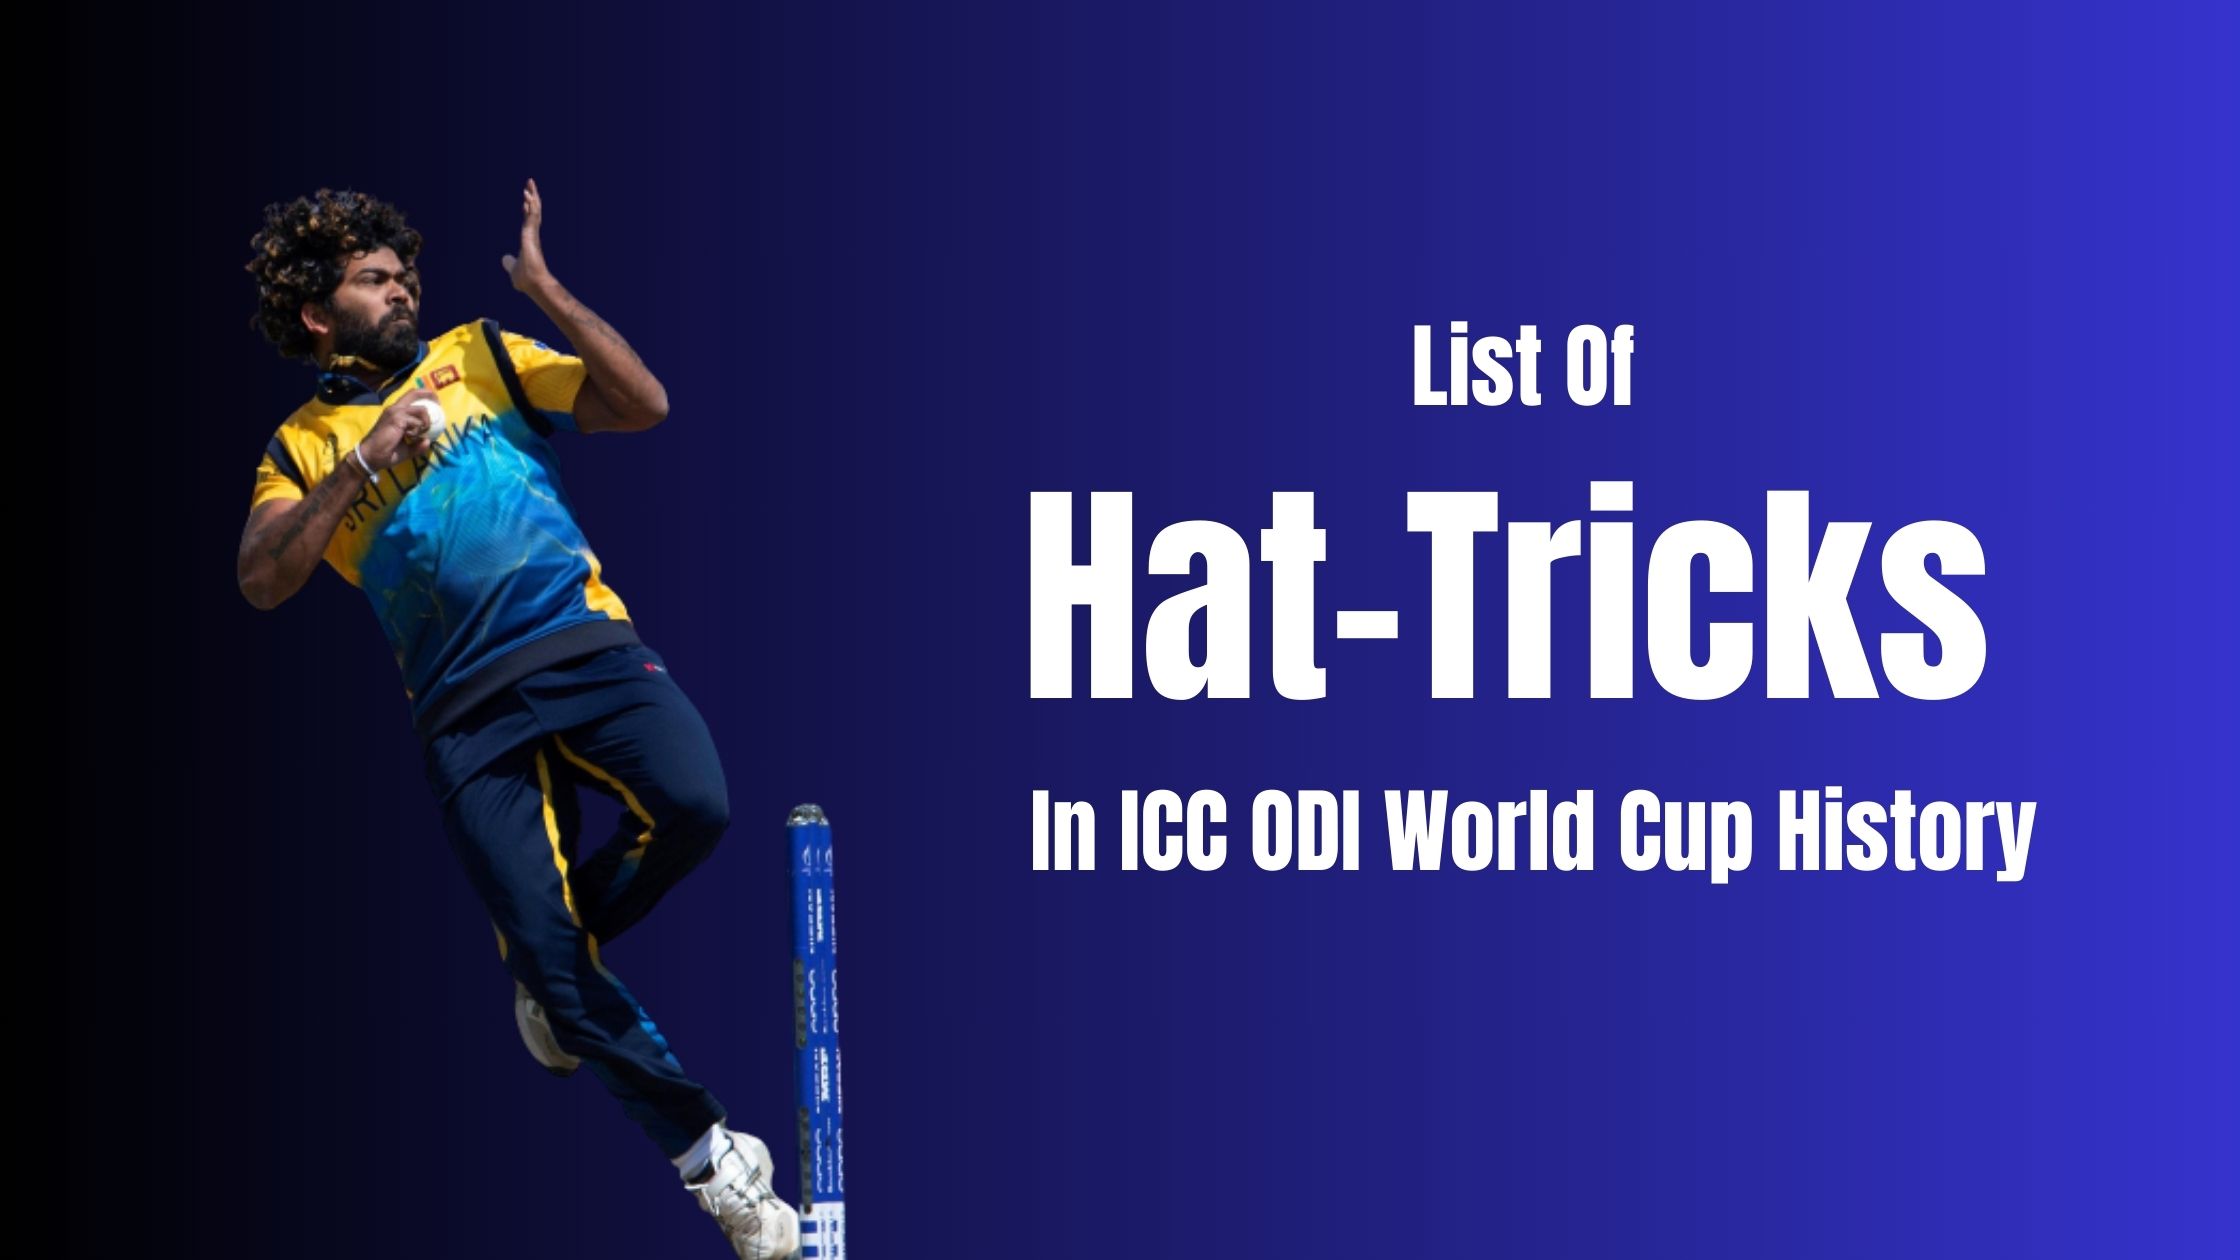 List Of Hat-Tricks In ICC ODI World Cup History